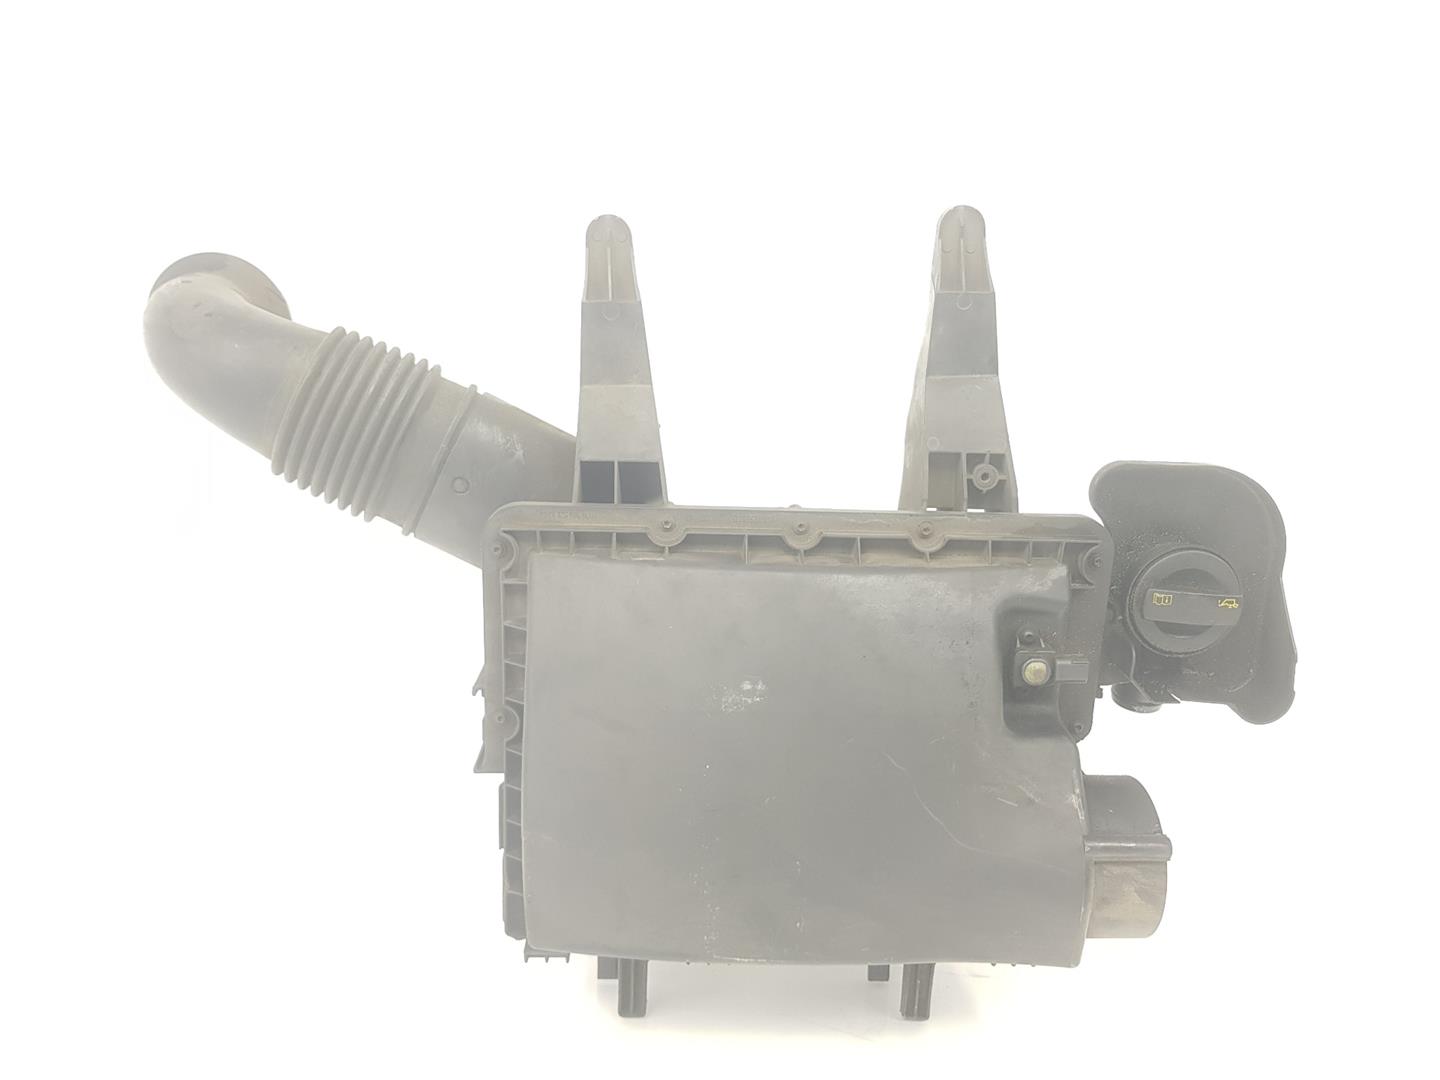 VOLKSWAGEN Crafter 1 generation (2006-2016) Other Engine Compartment Parts 03L115295, 2E0129601D 24473590